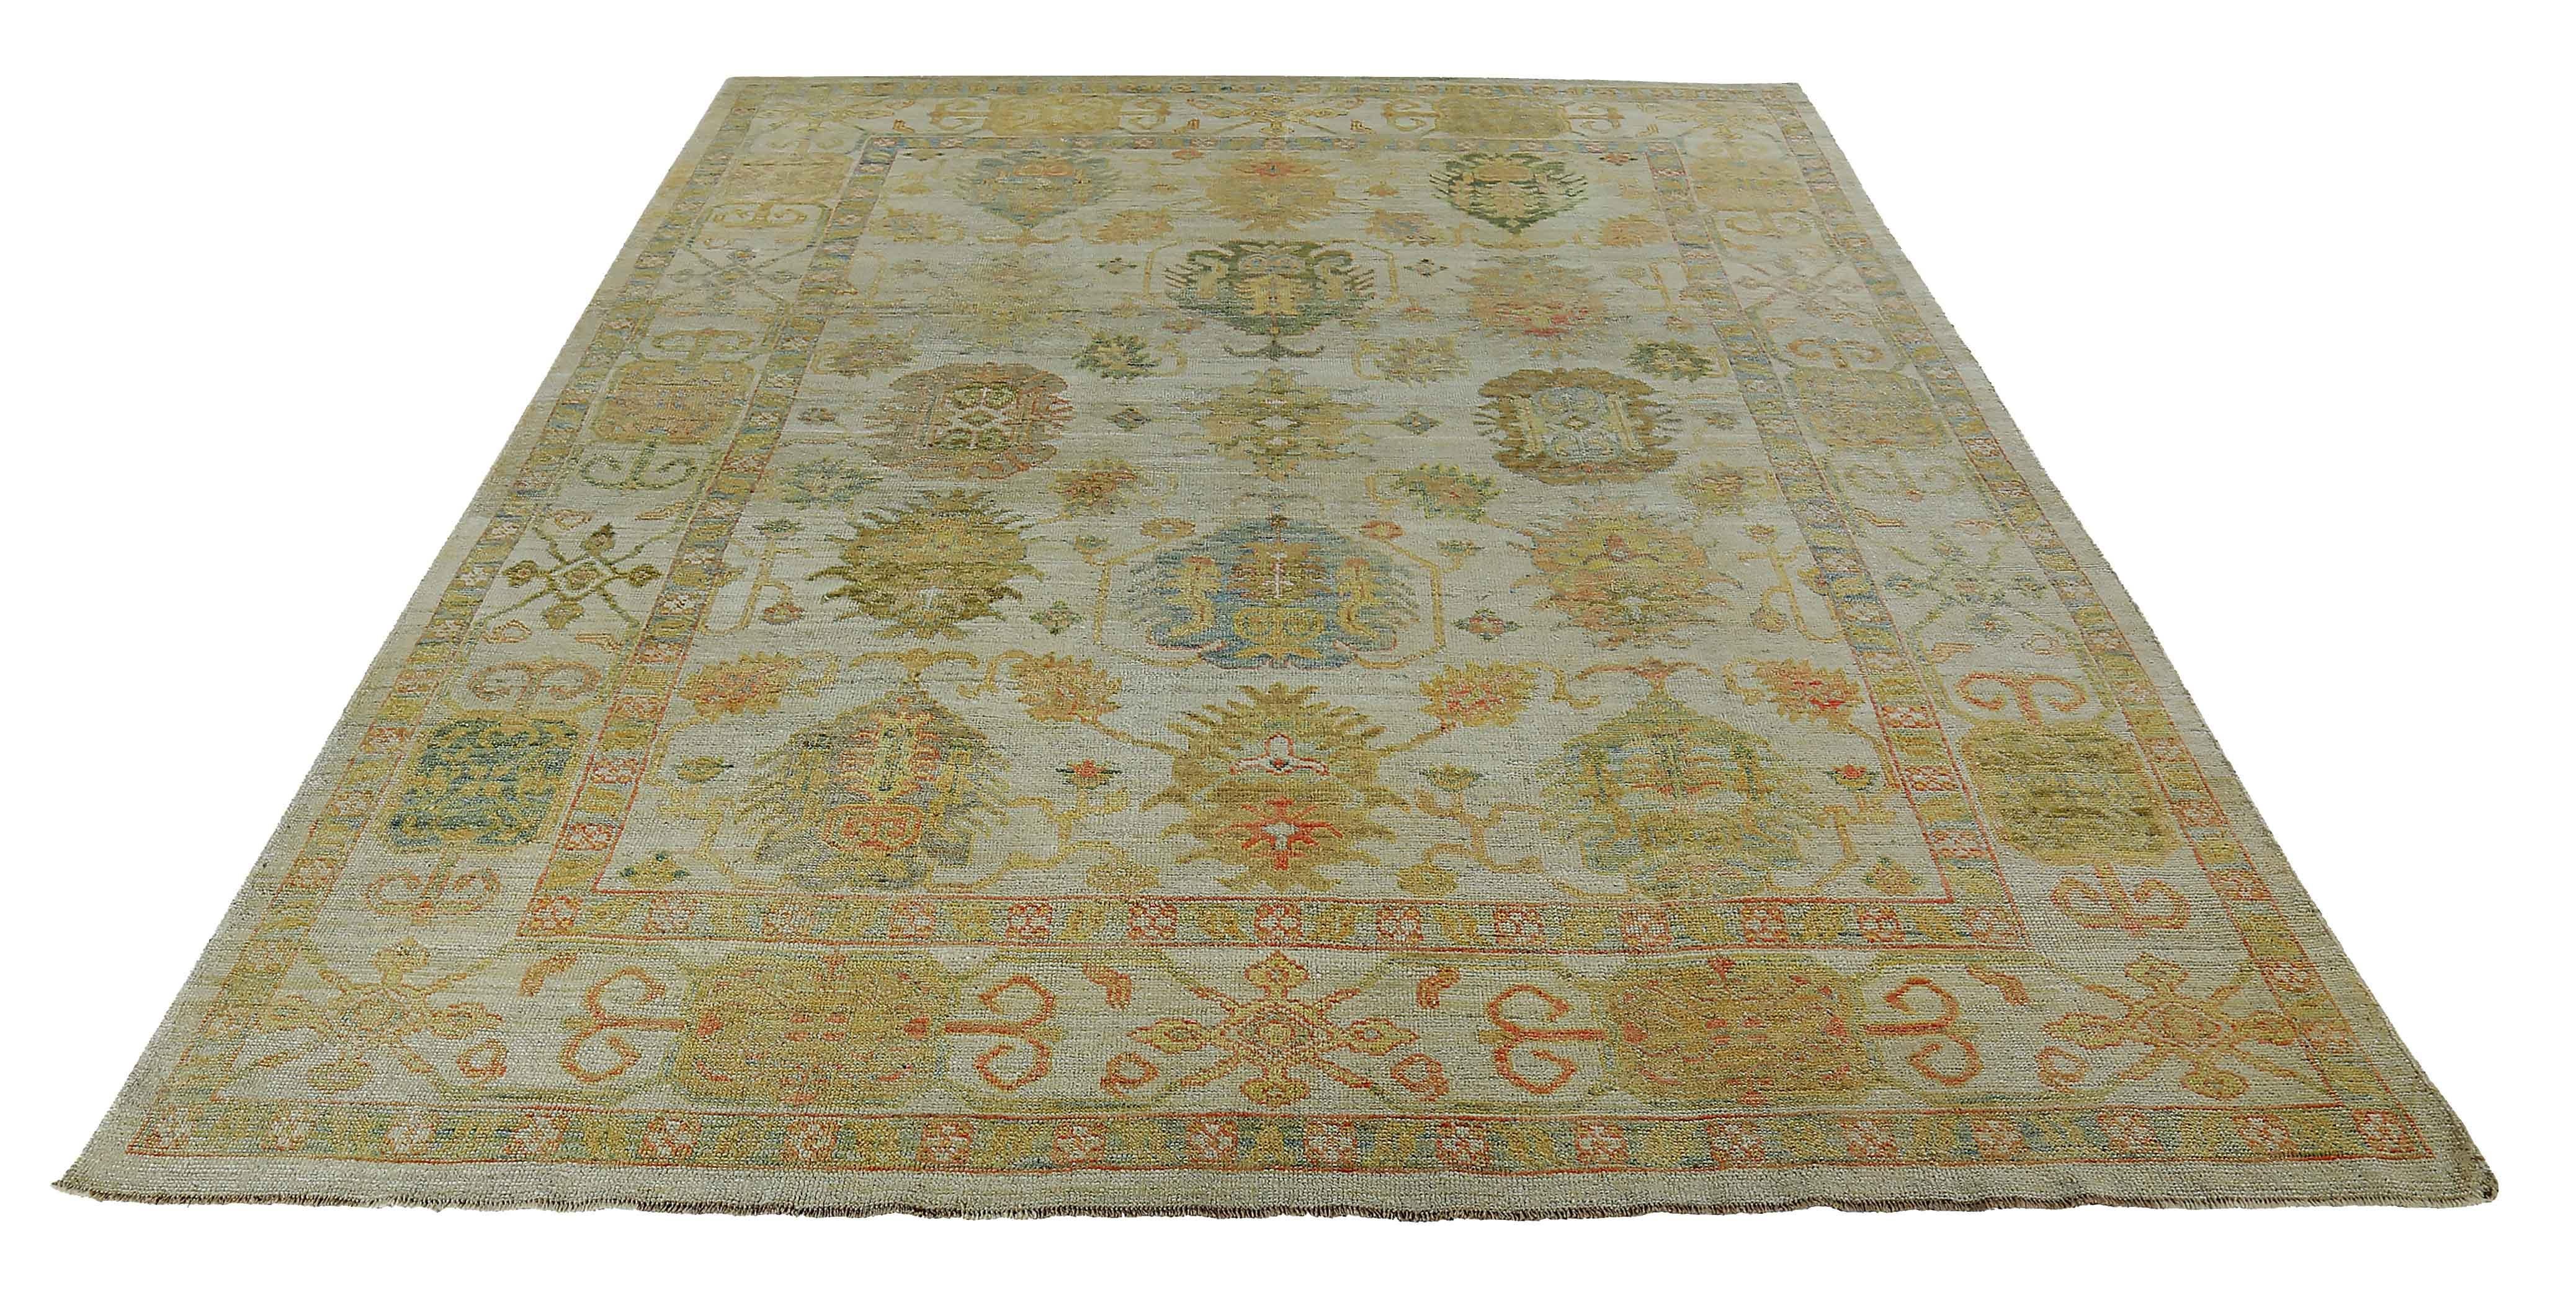 New Turkish rug made of handwoven sheep’s wool of the finest quality. It’s colored with organic vegetable dyes that are certified safe for humans and pets alike. It features green and gray floral heads on an ivory field. Flower patterns are commonly